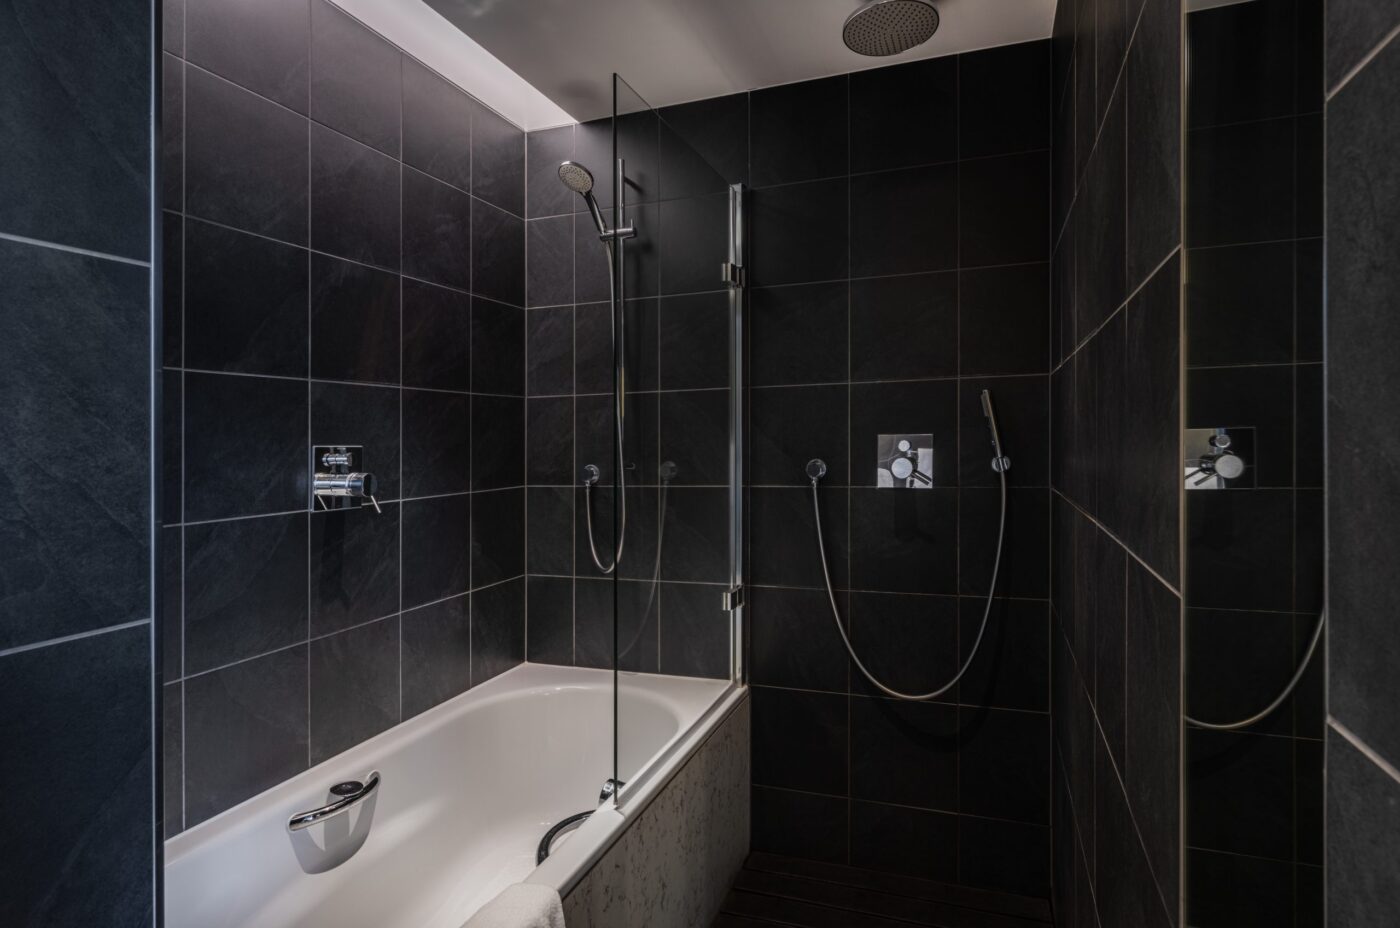 Spacious bathroom with a built in bathtub and shower, with an additional shower head.